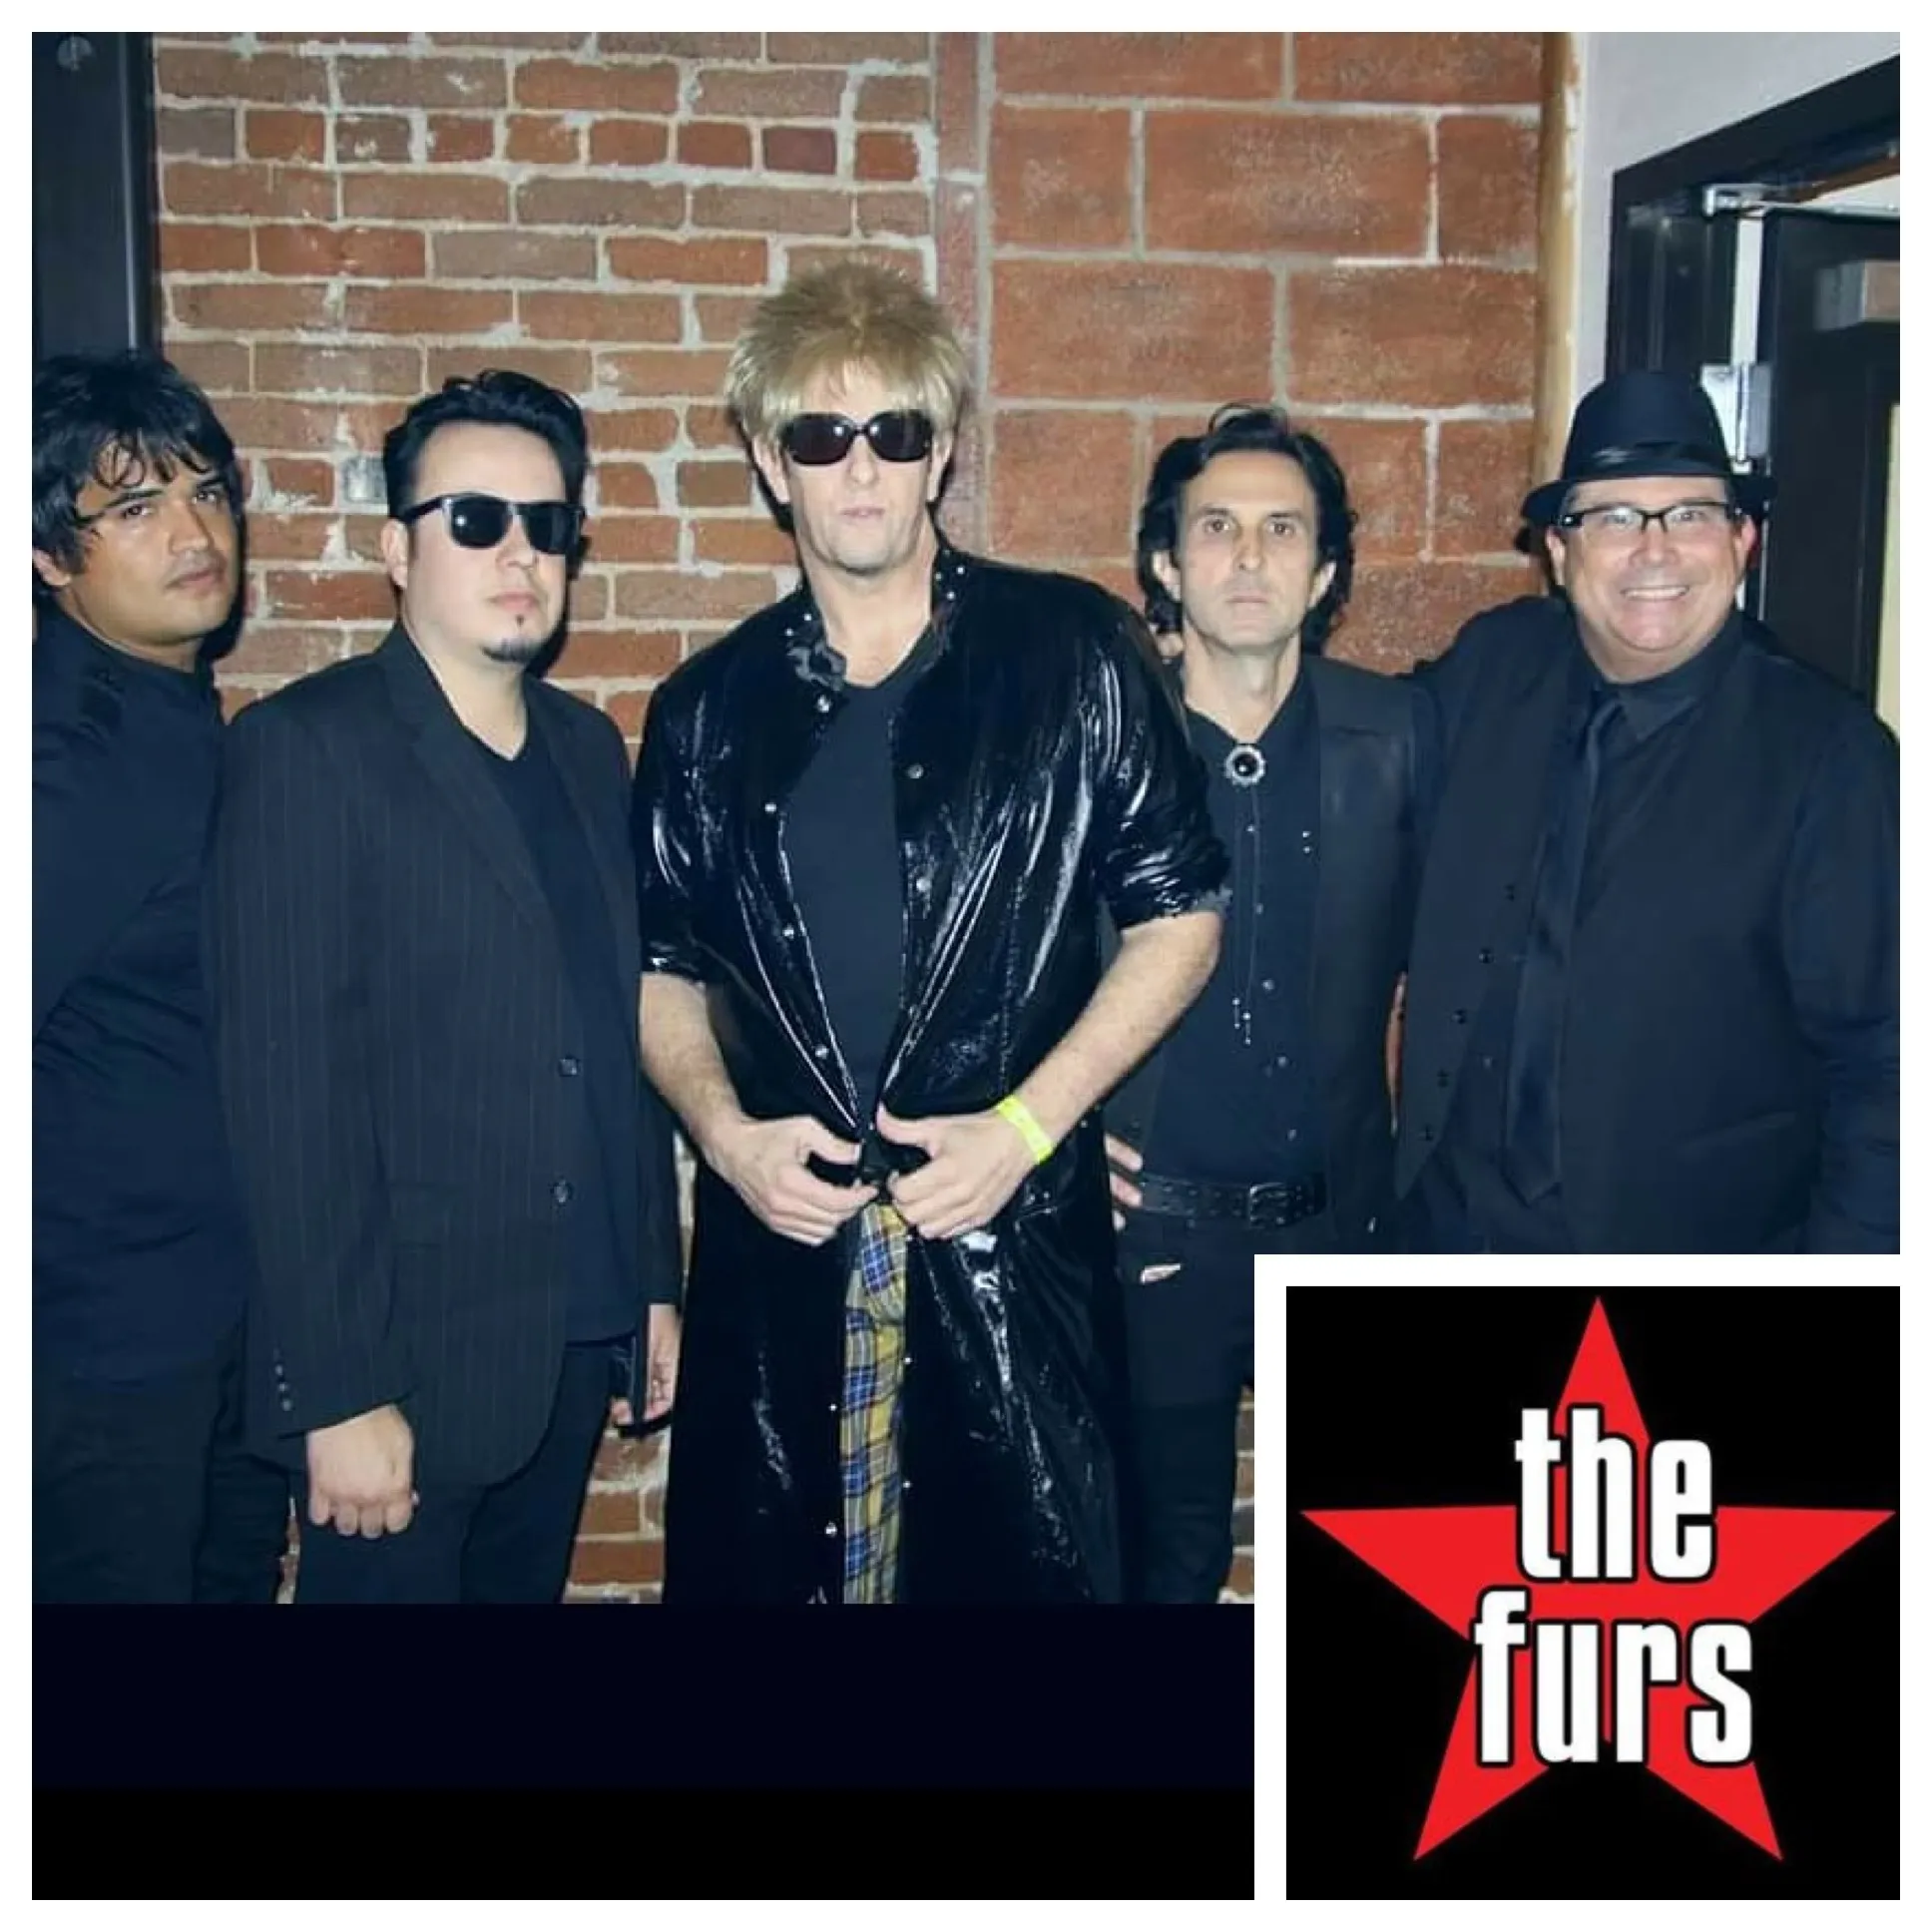 The Furs